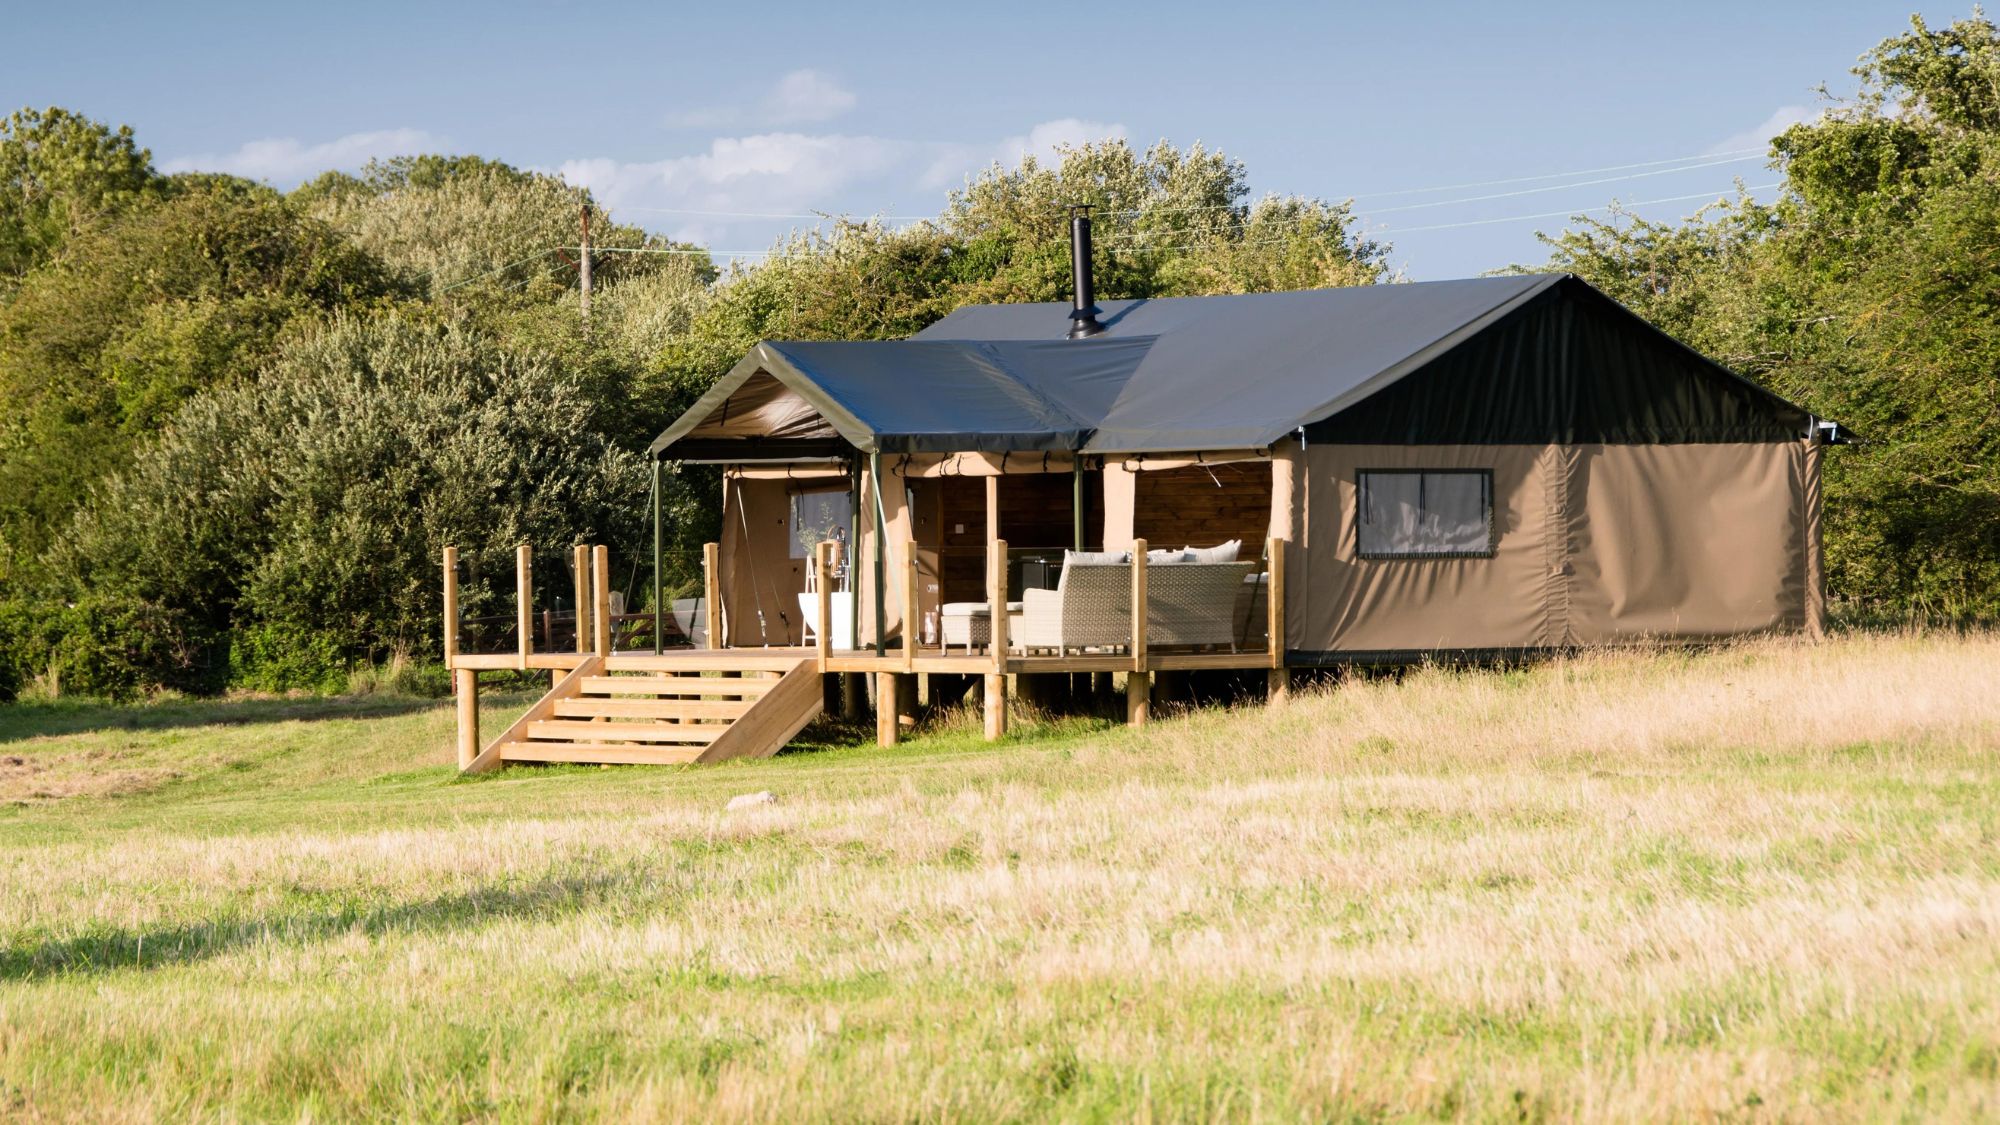  The Nest Glamping: a tented camp in rural Lincolnshire 